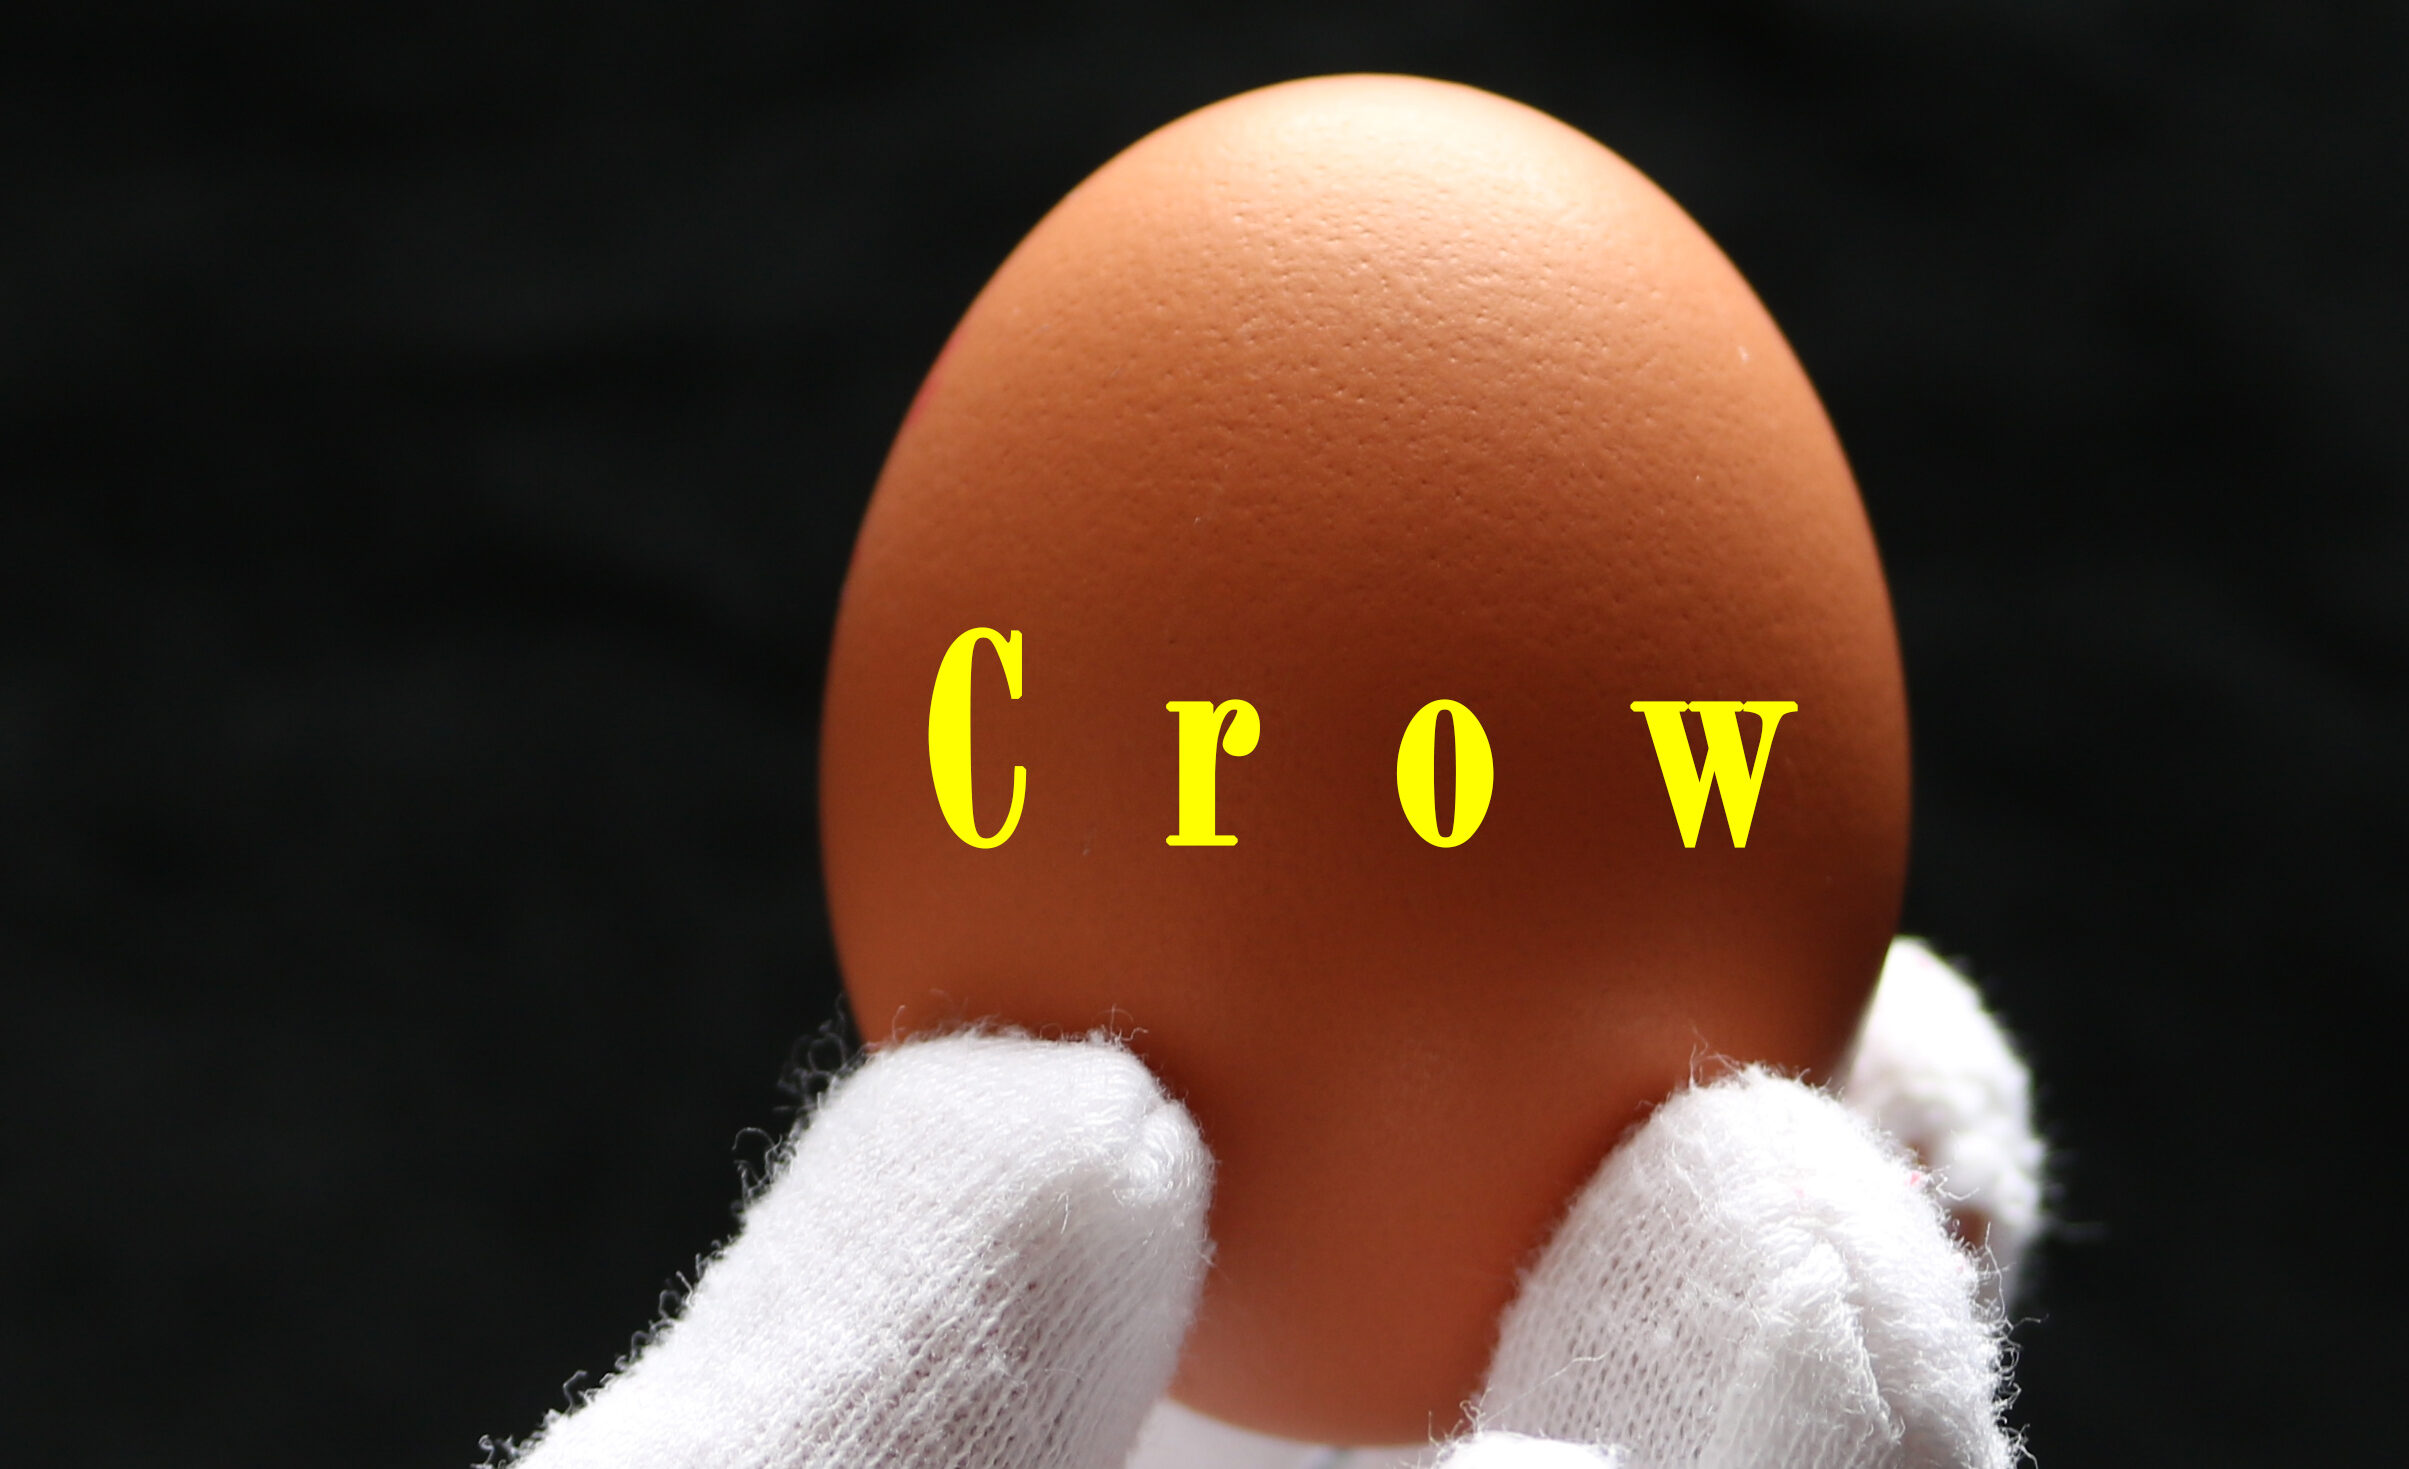 A promotional image of a magician's hand holding an egg. It says Crow in yellow text.